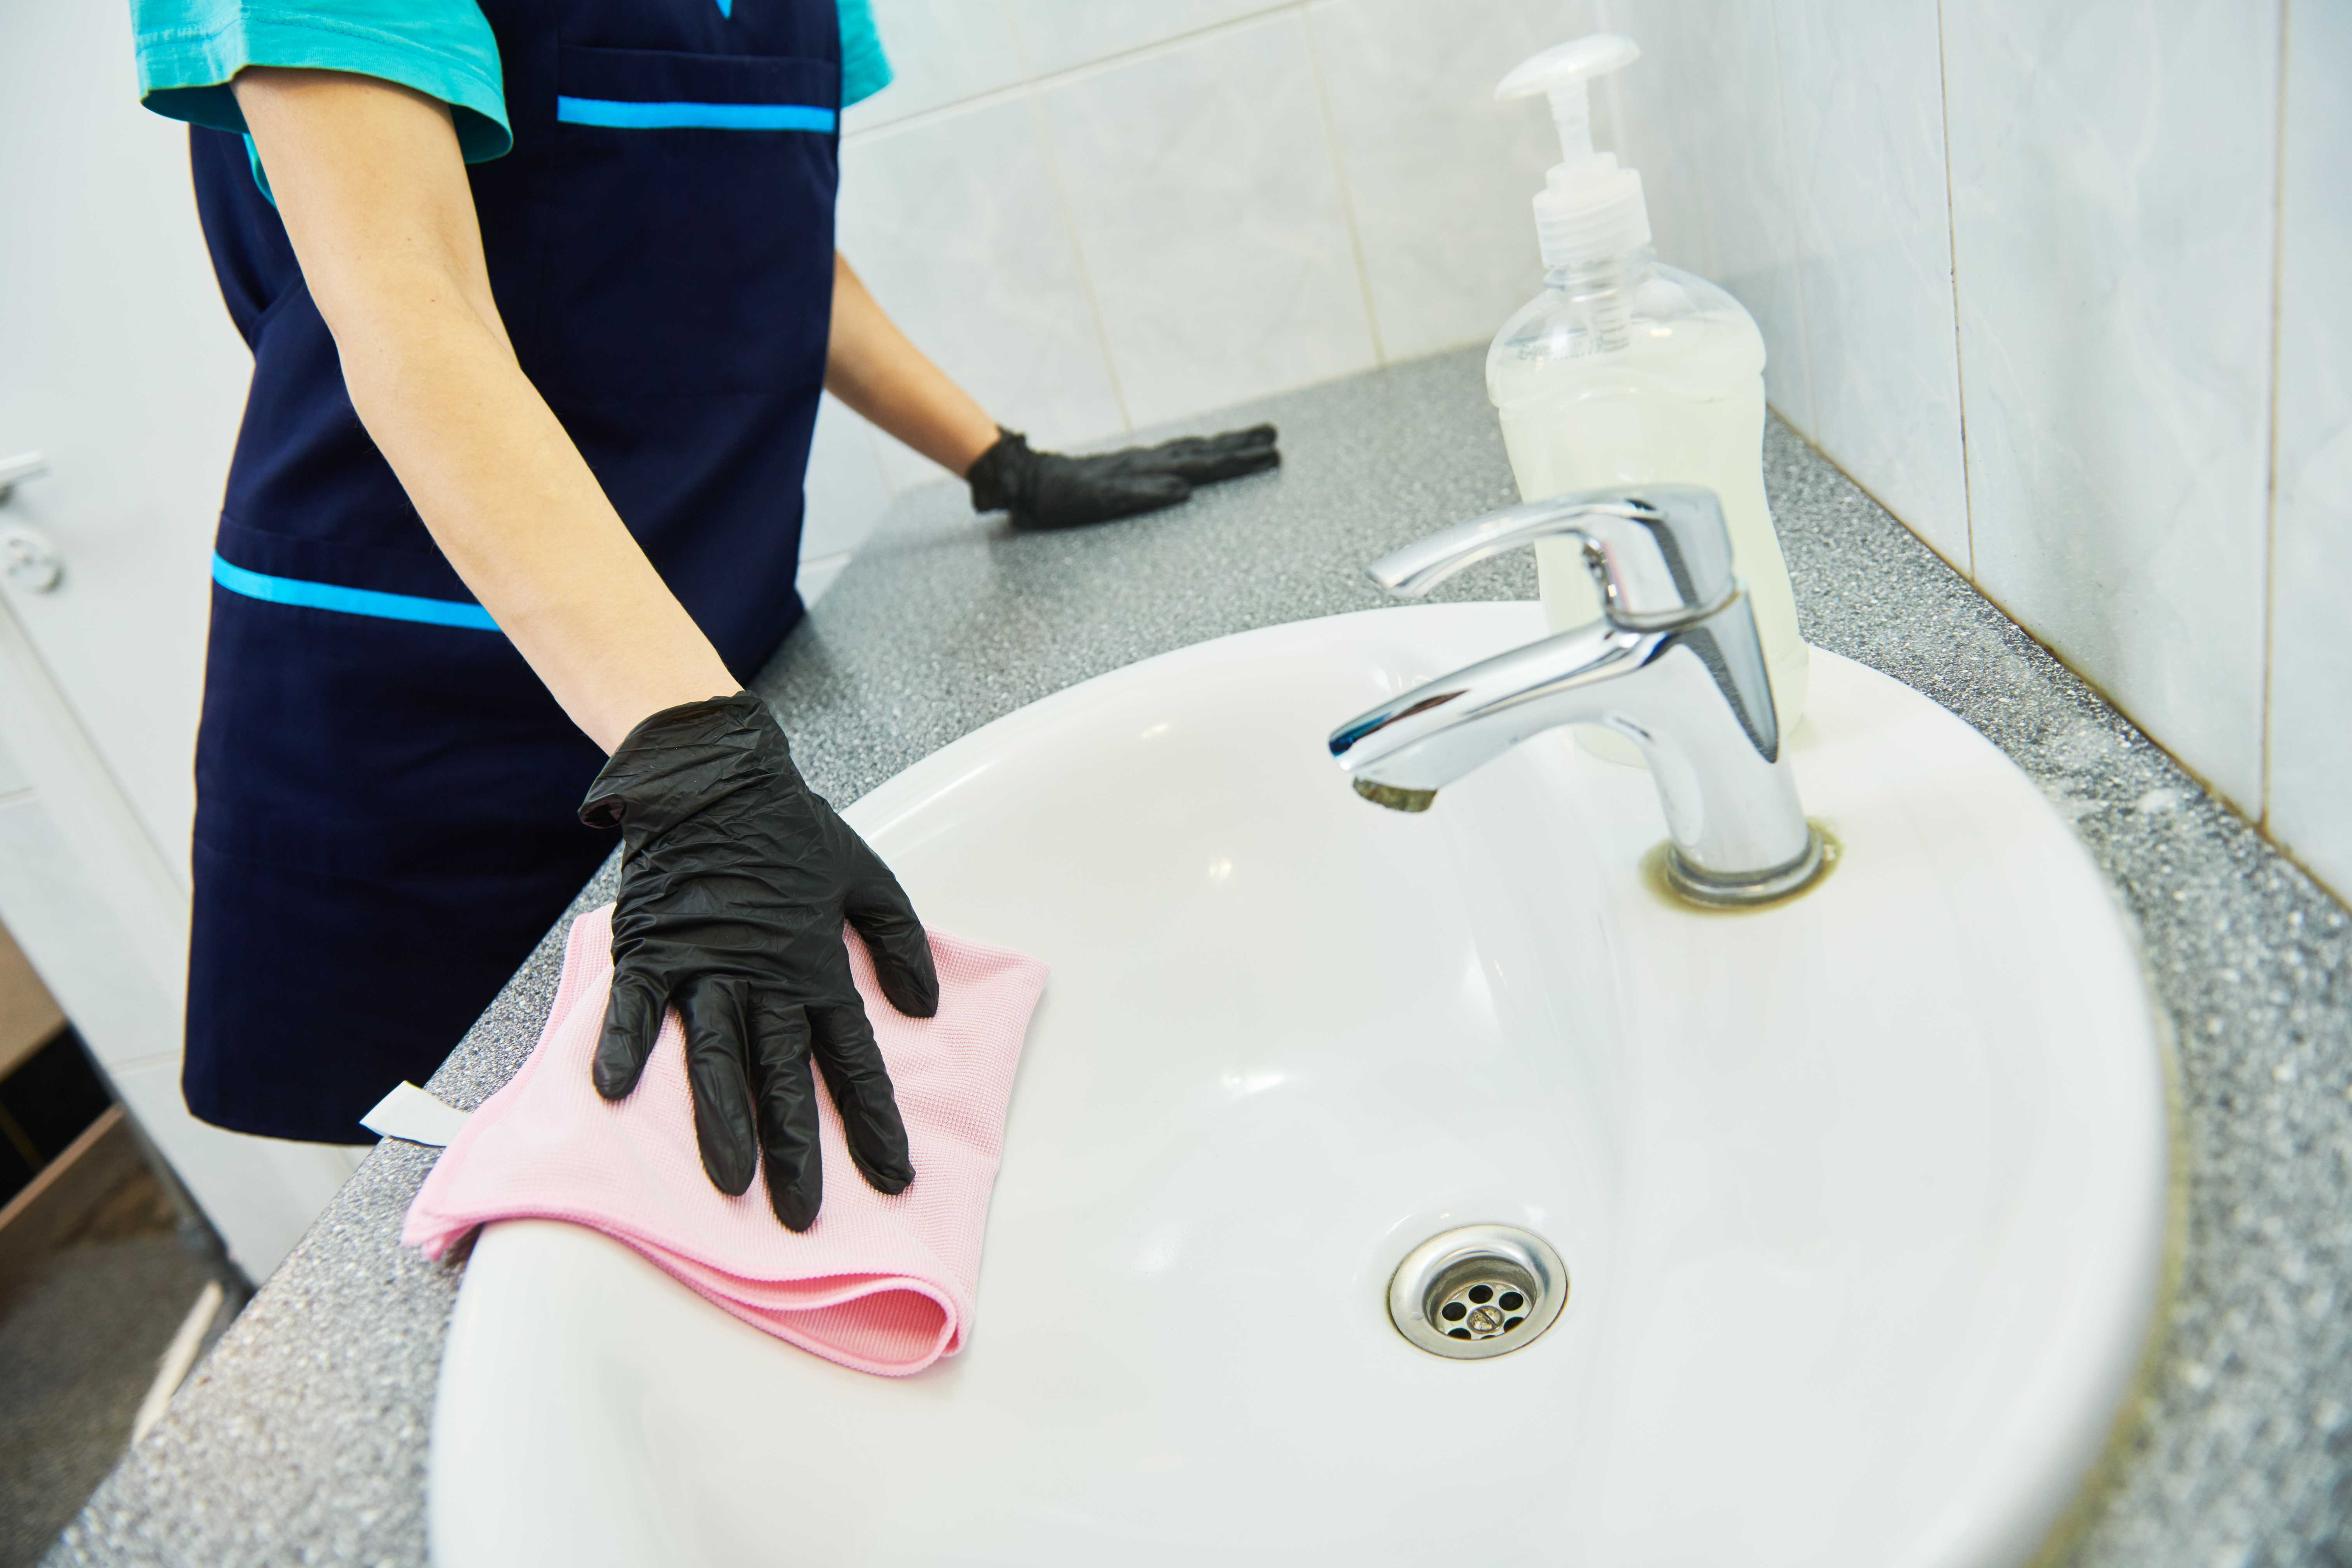 Day Porter wiping down facility sink with pink gloves